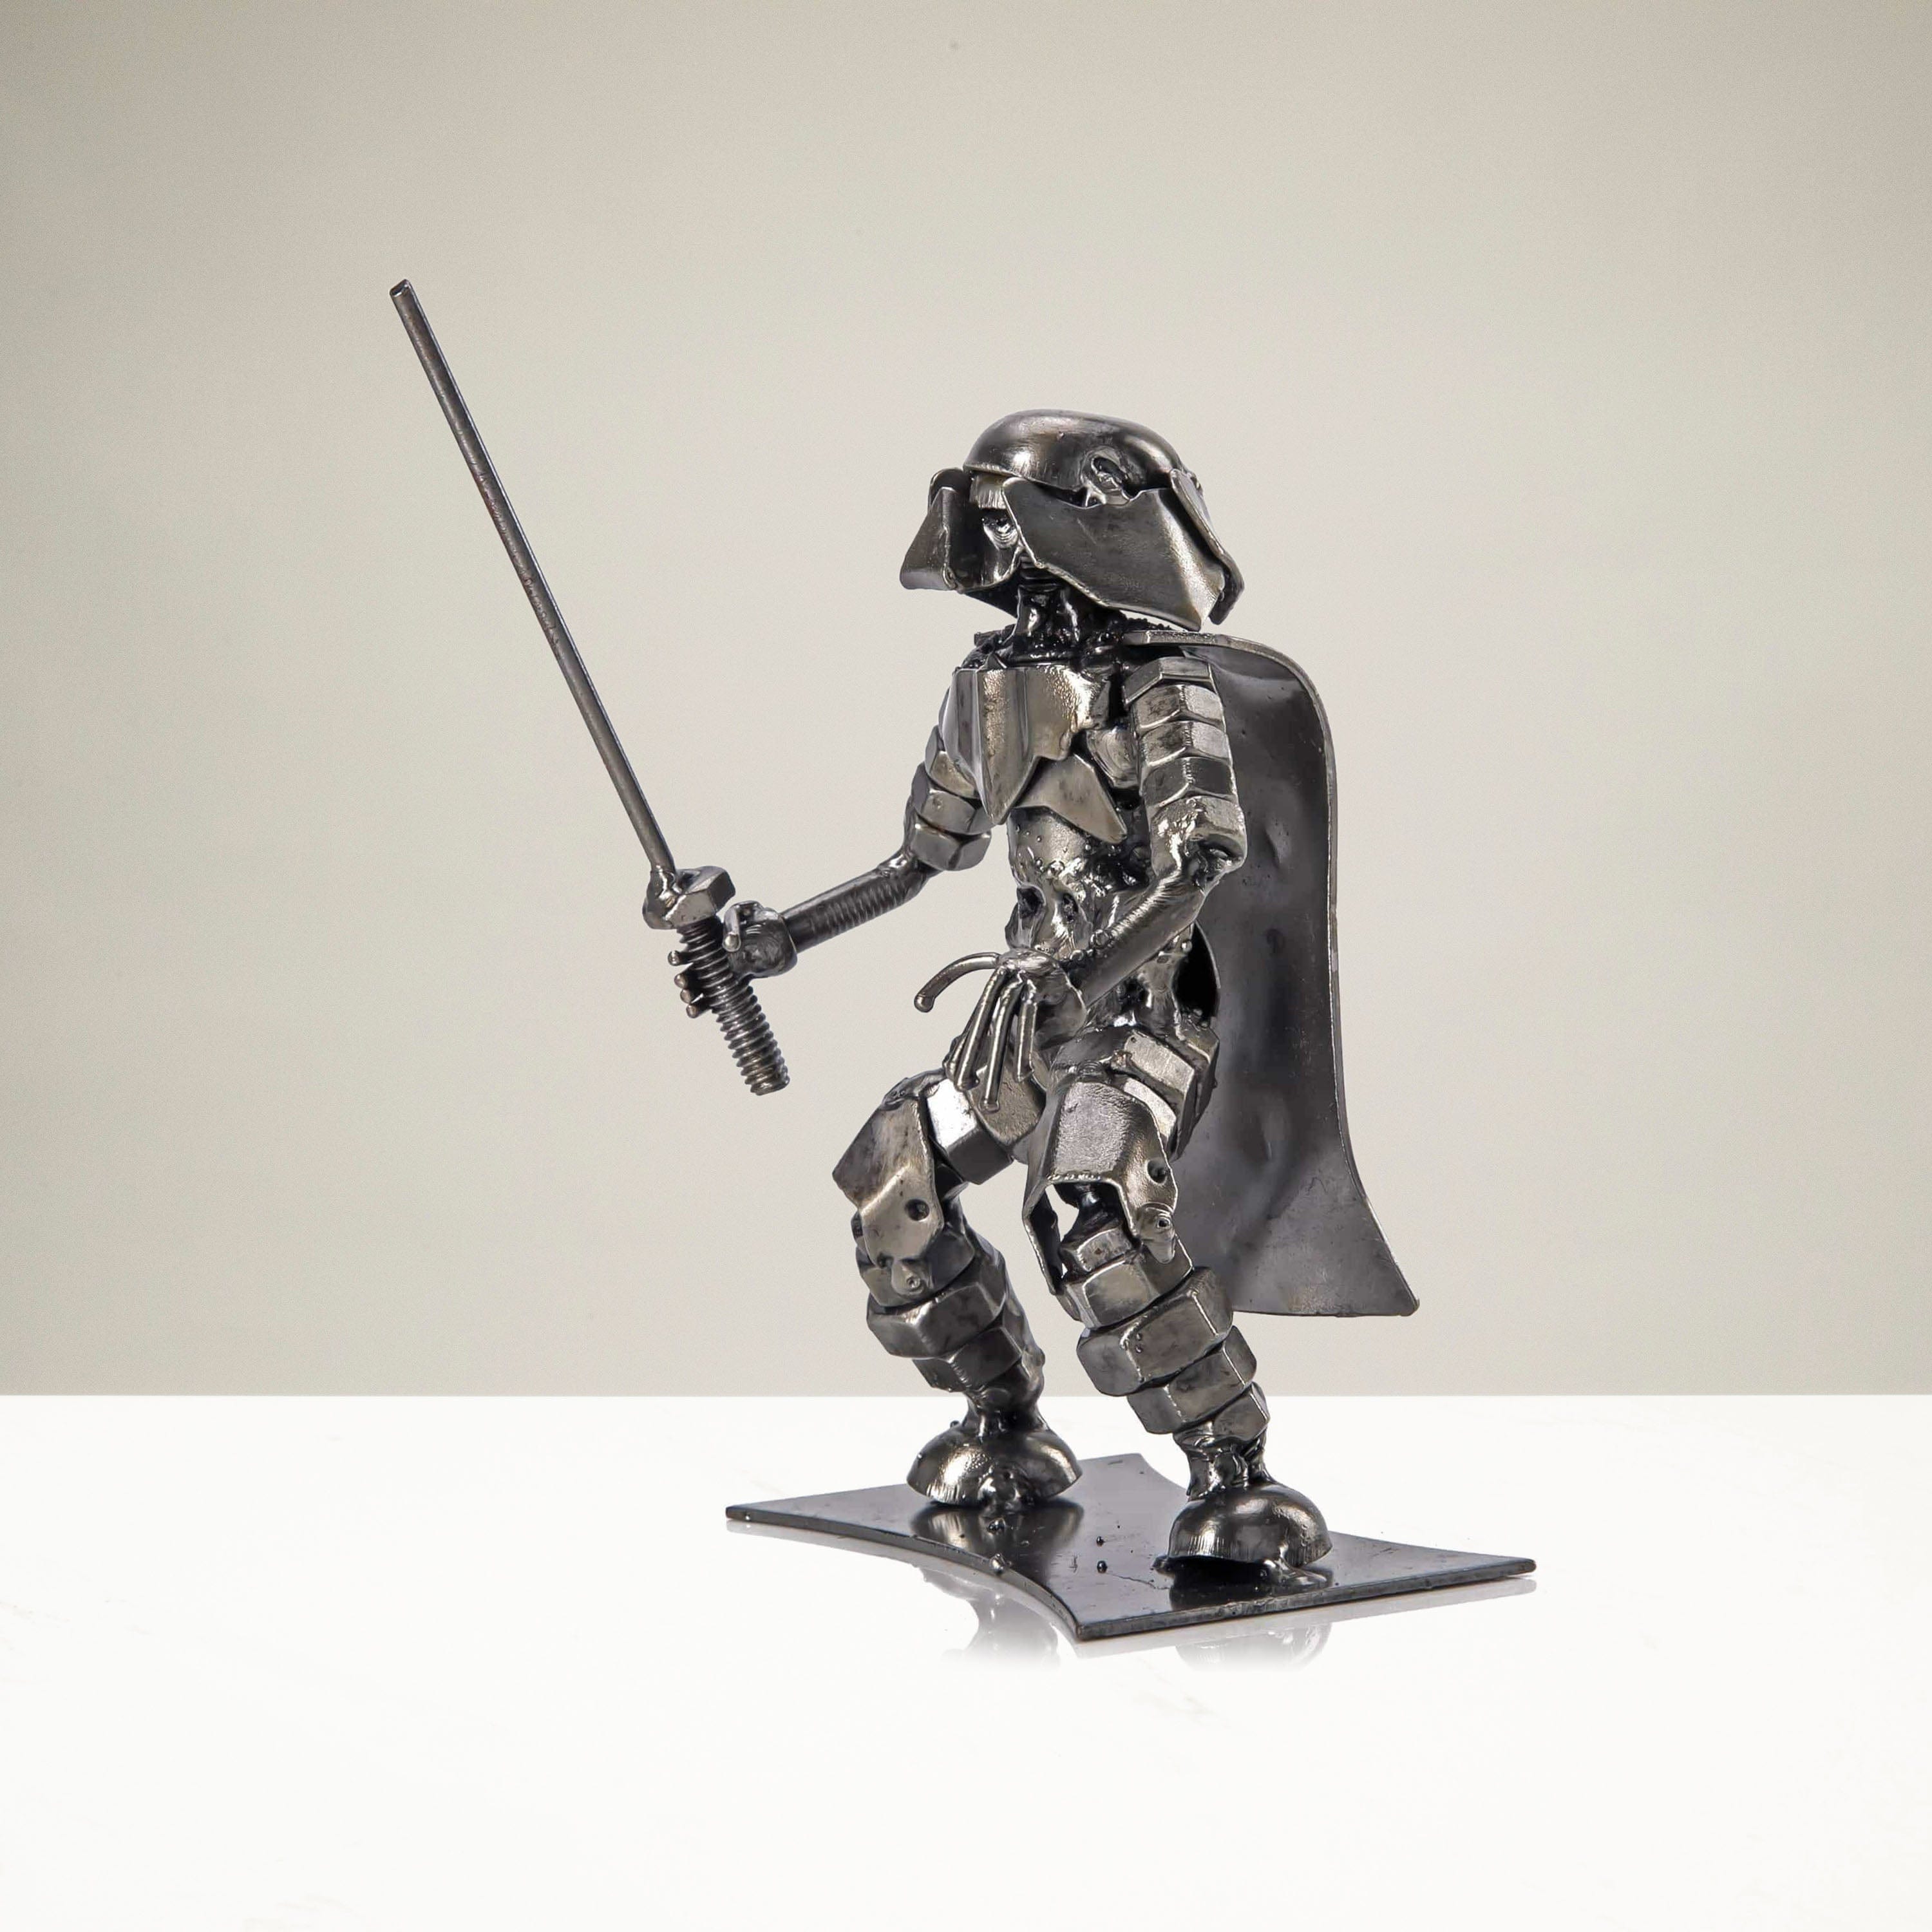 Kalifano Recycled Metal Art Darth Vader with Sword Inspired Recycled Metal Sculpture RMS-250DVB-N